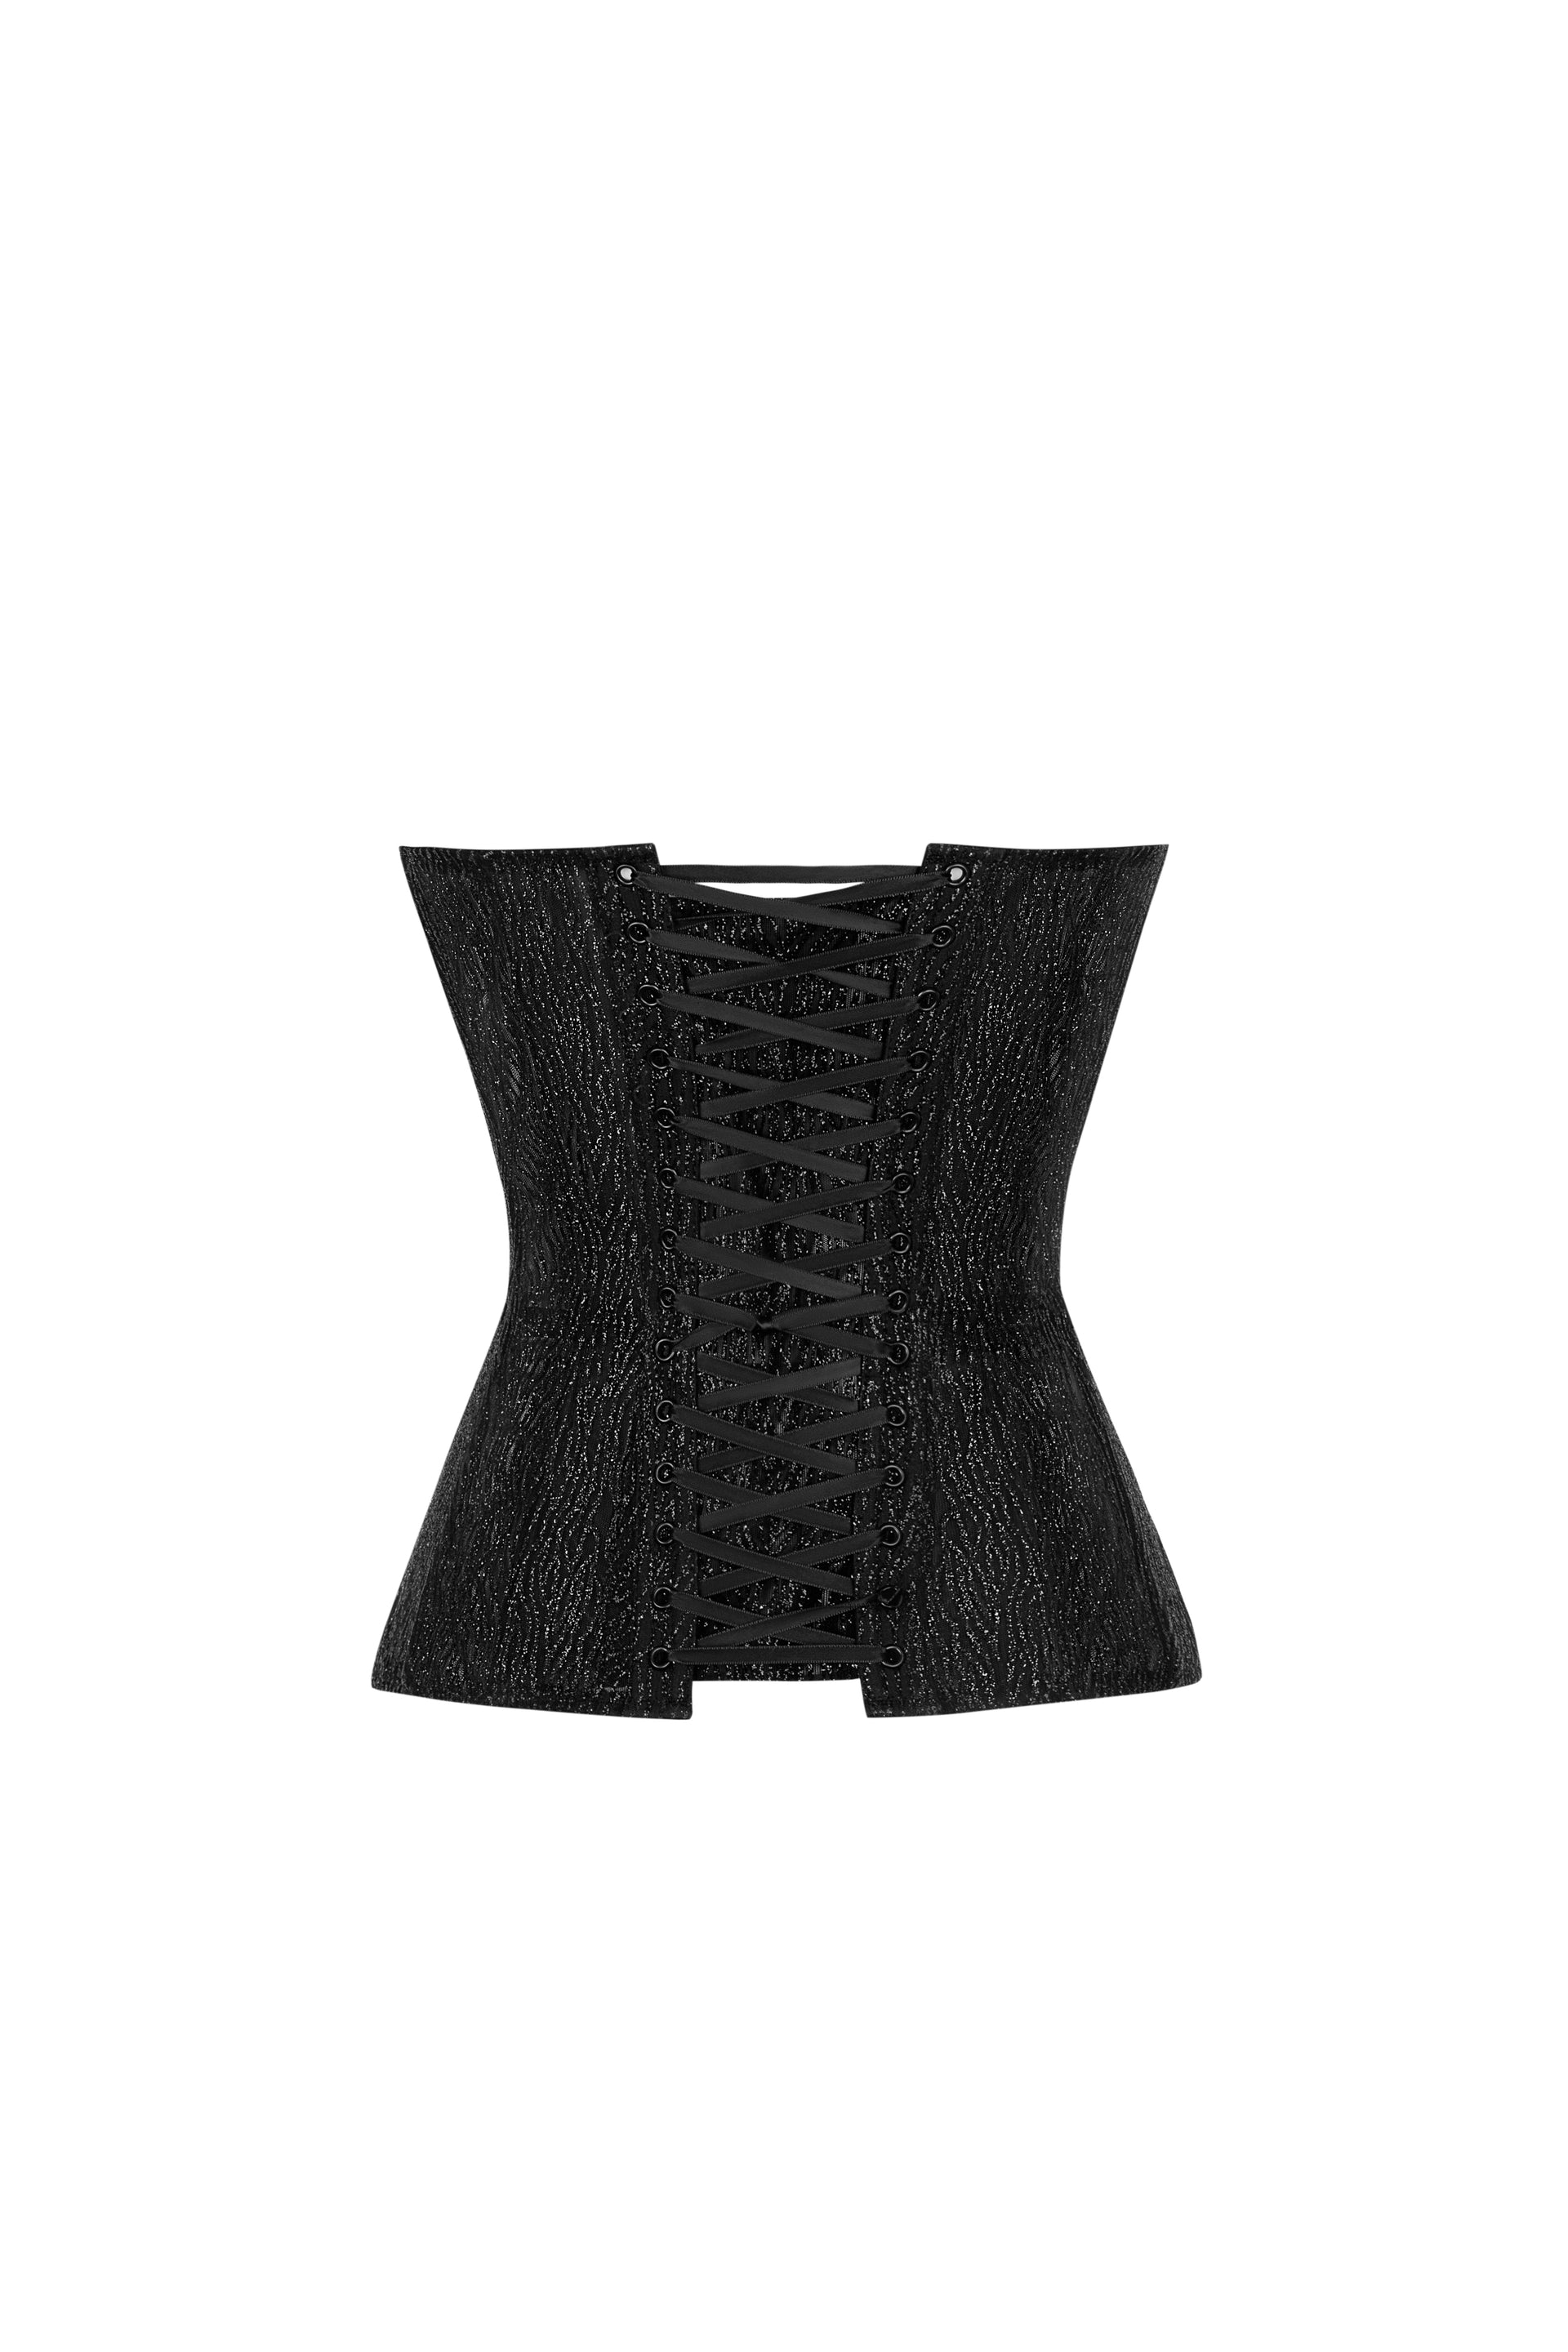 Shiny black wave corset with cups